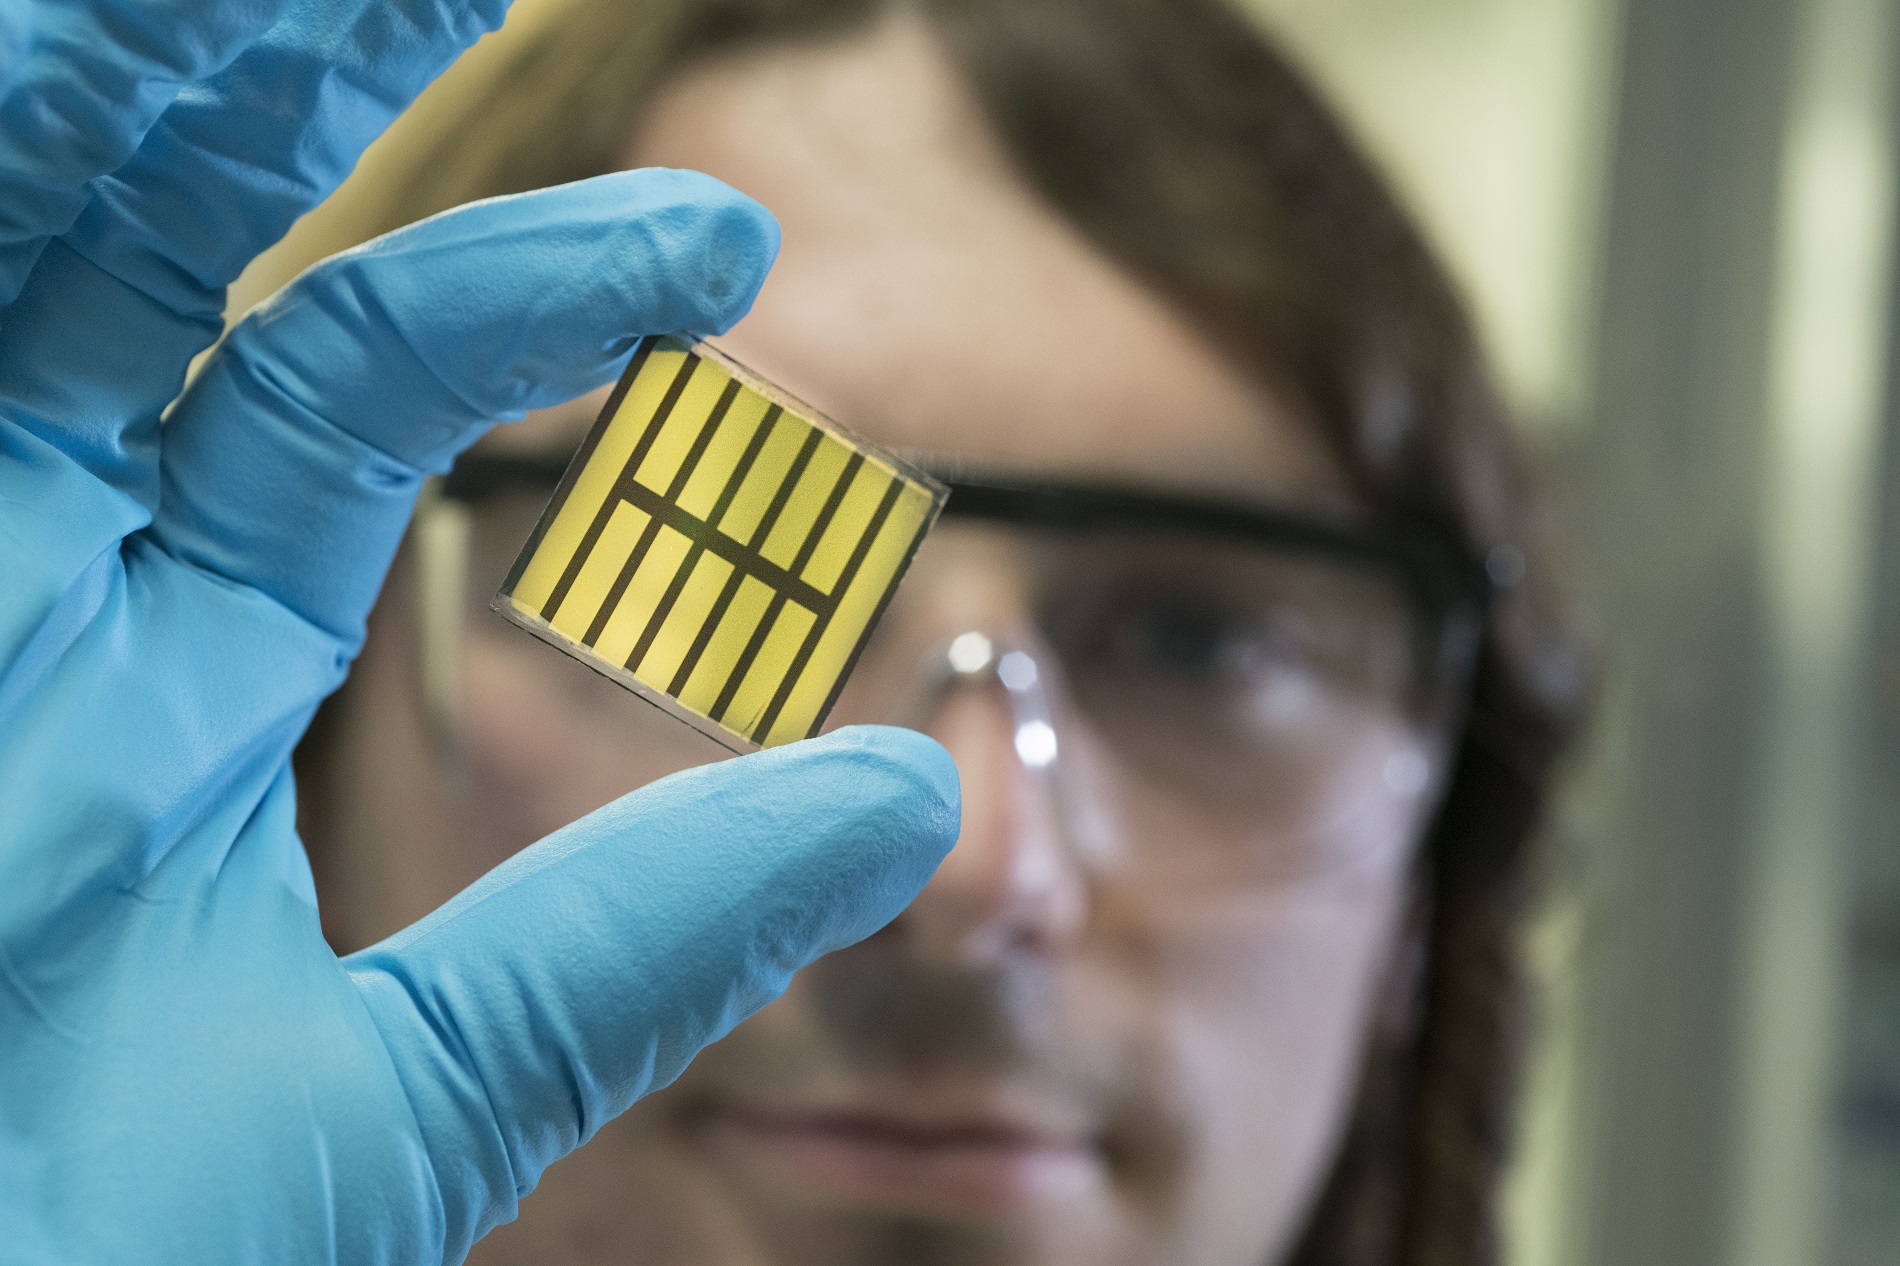 The researchers engaged in the Capitano project are developing new materials, processes and prototypes for highly efficient perovskite solar cells and modules